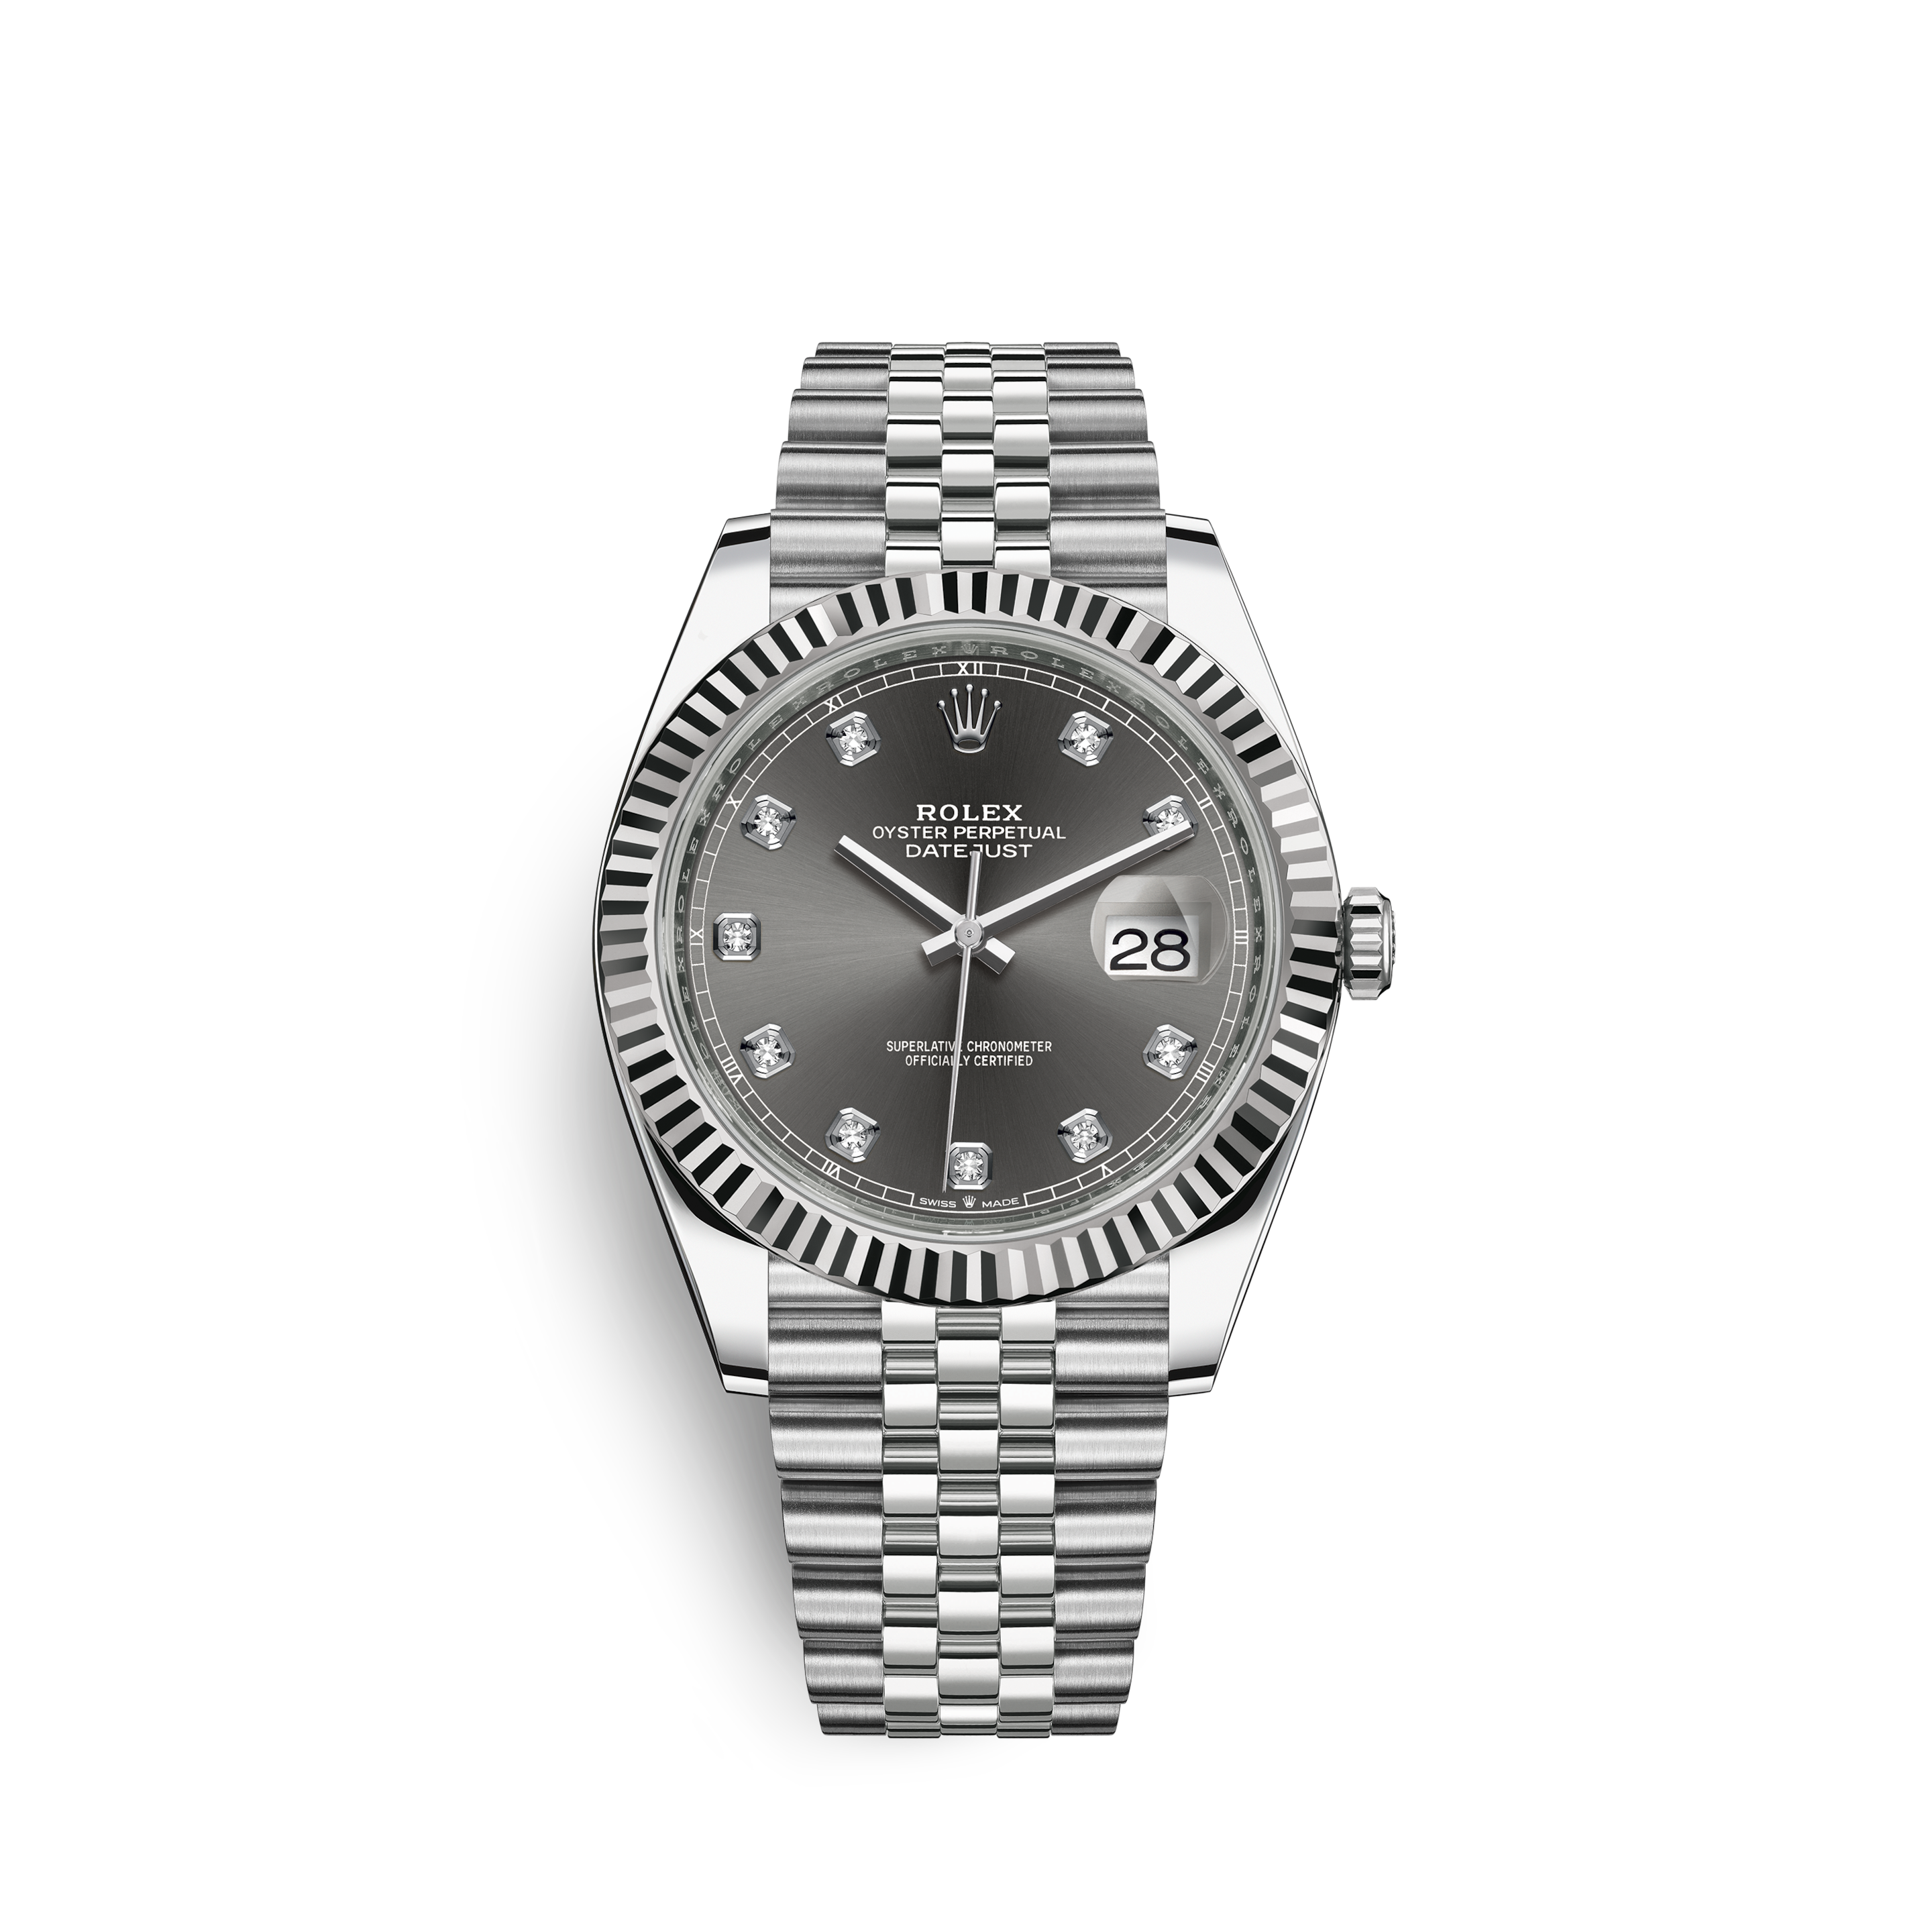 rolex oyster perpetual datejust superlative chronometer officially certified cosmograph